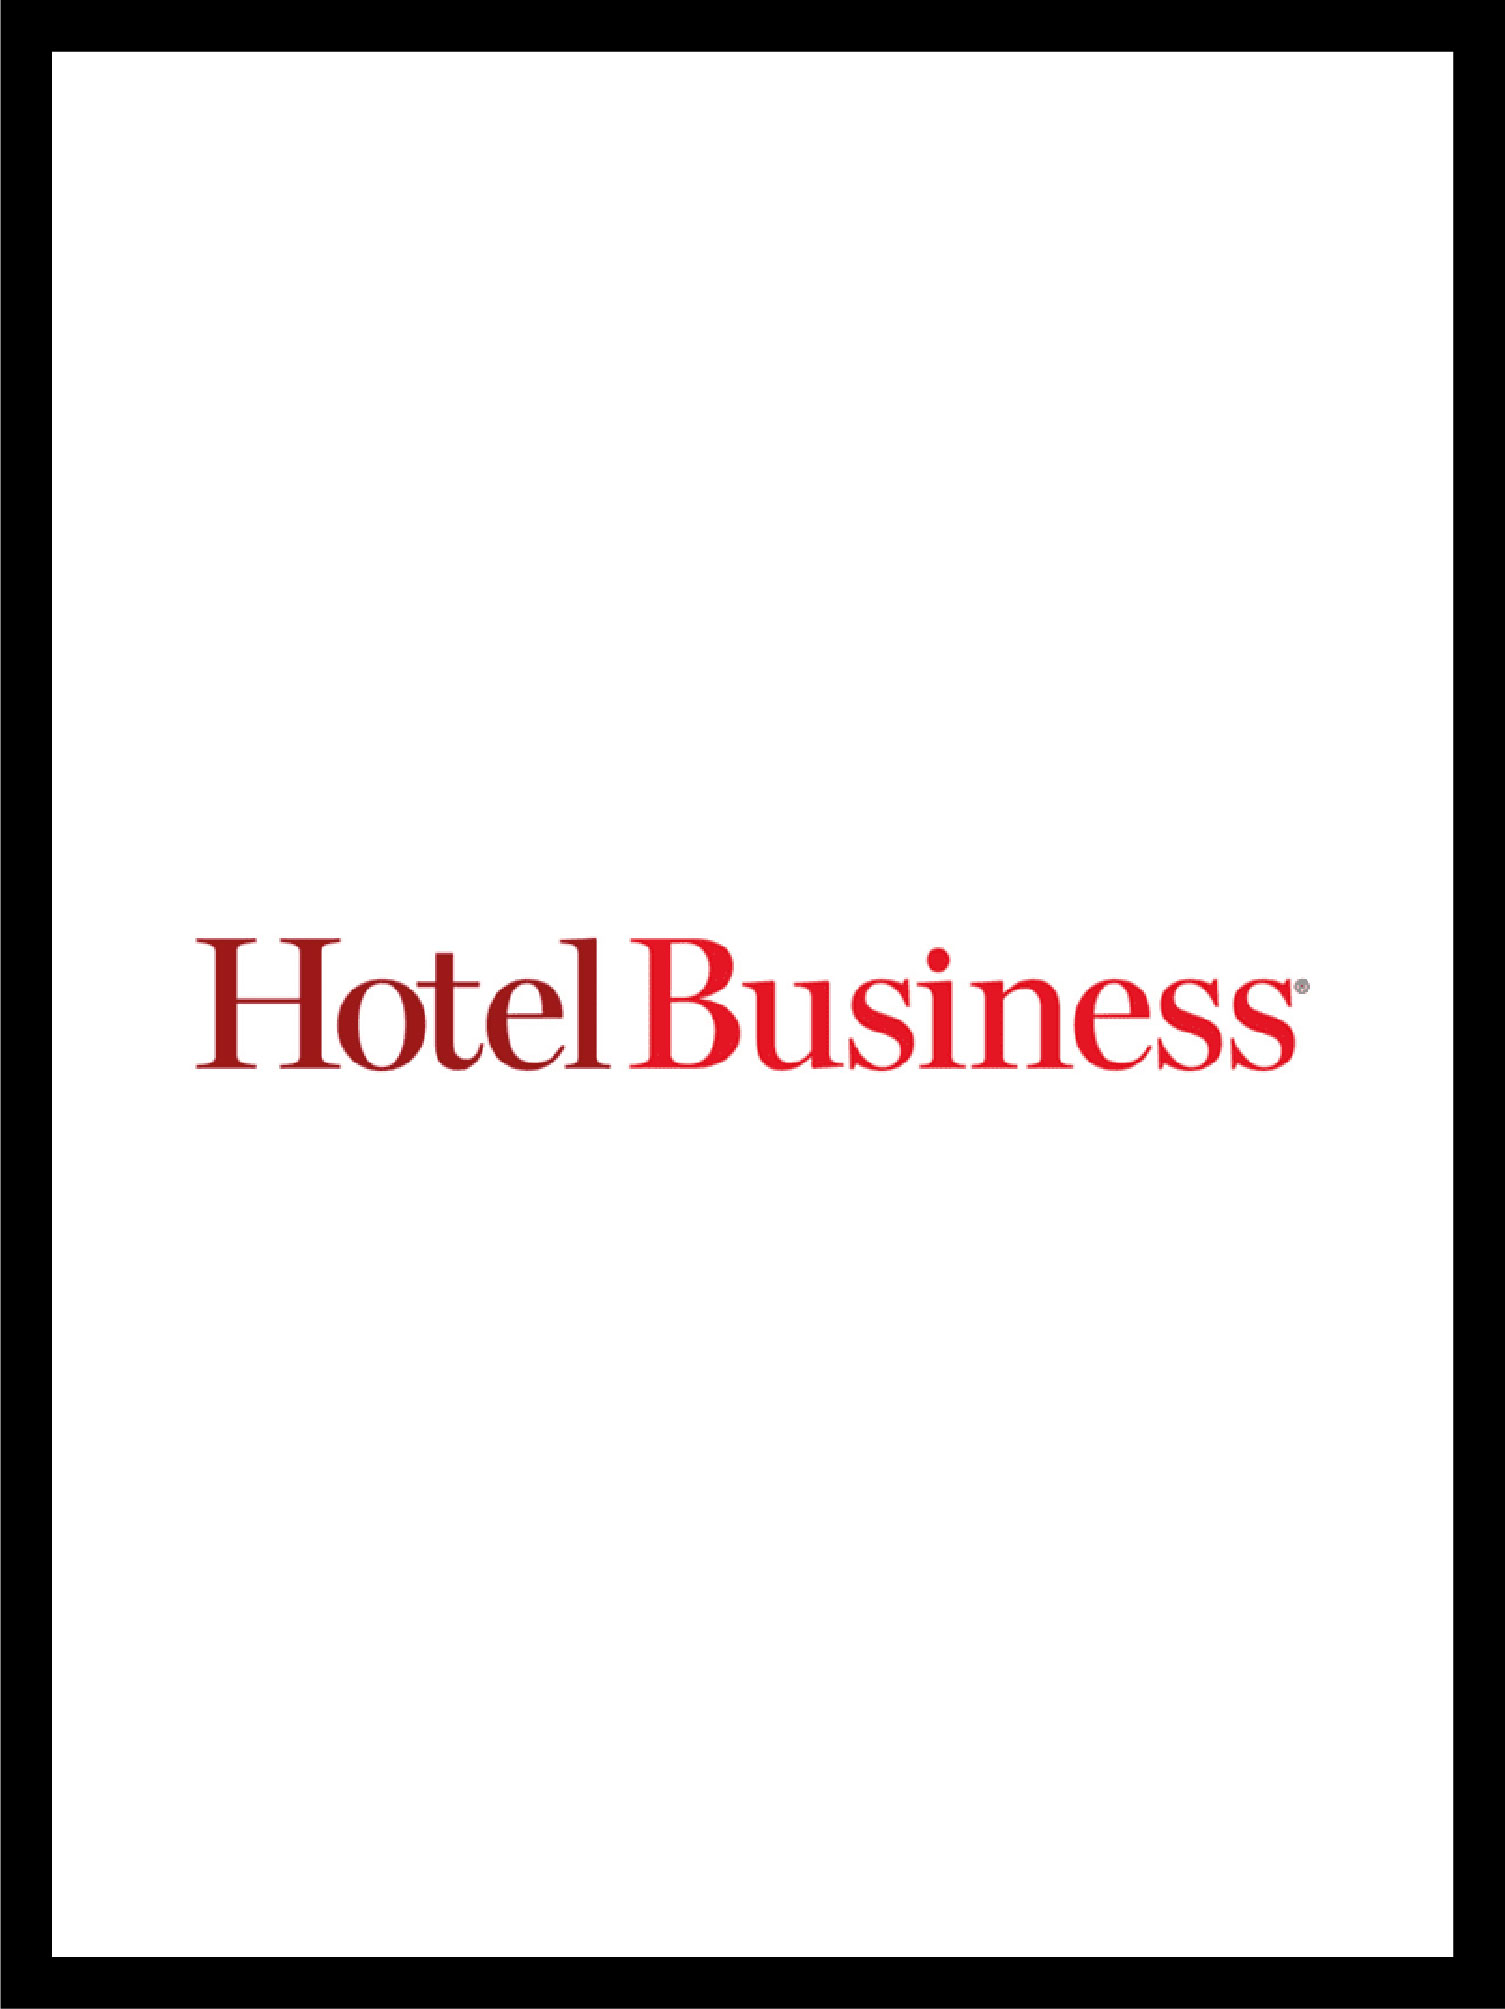 couverture magazine hotel business